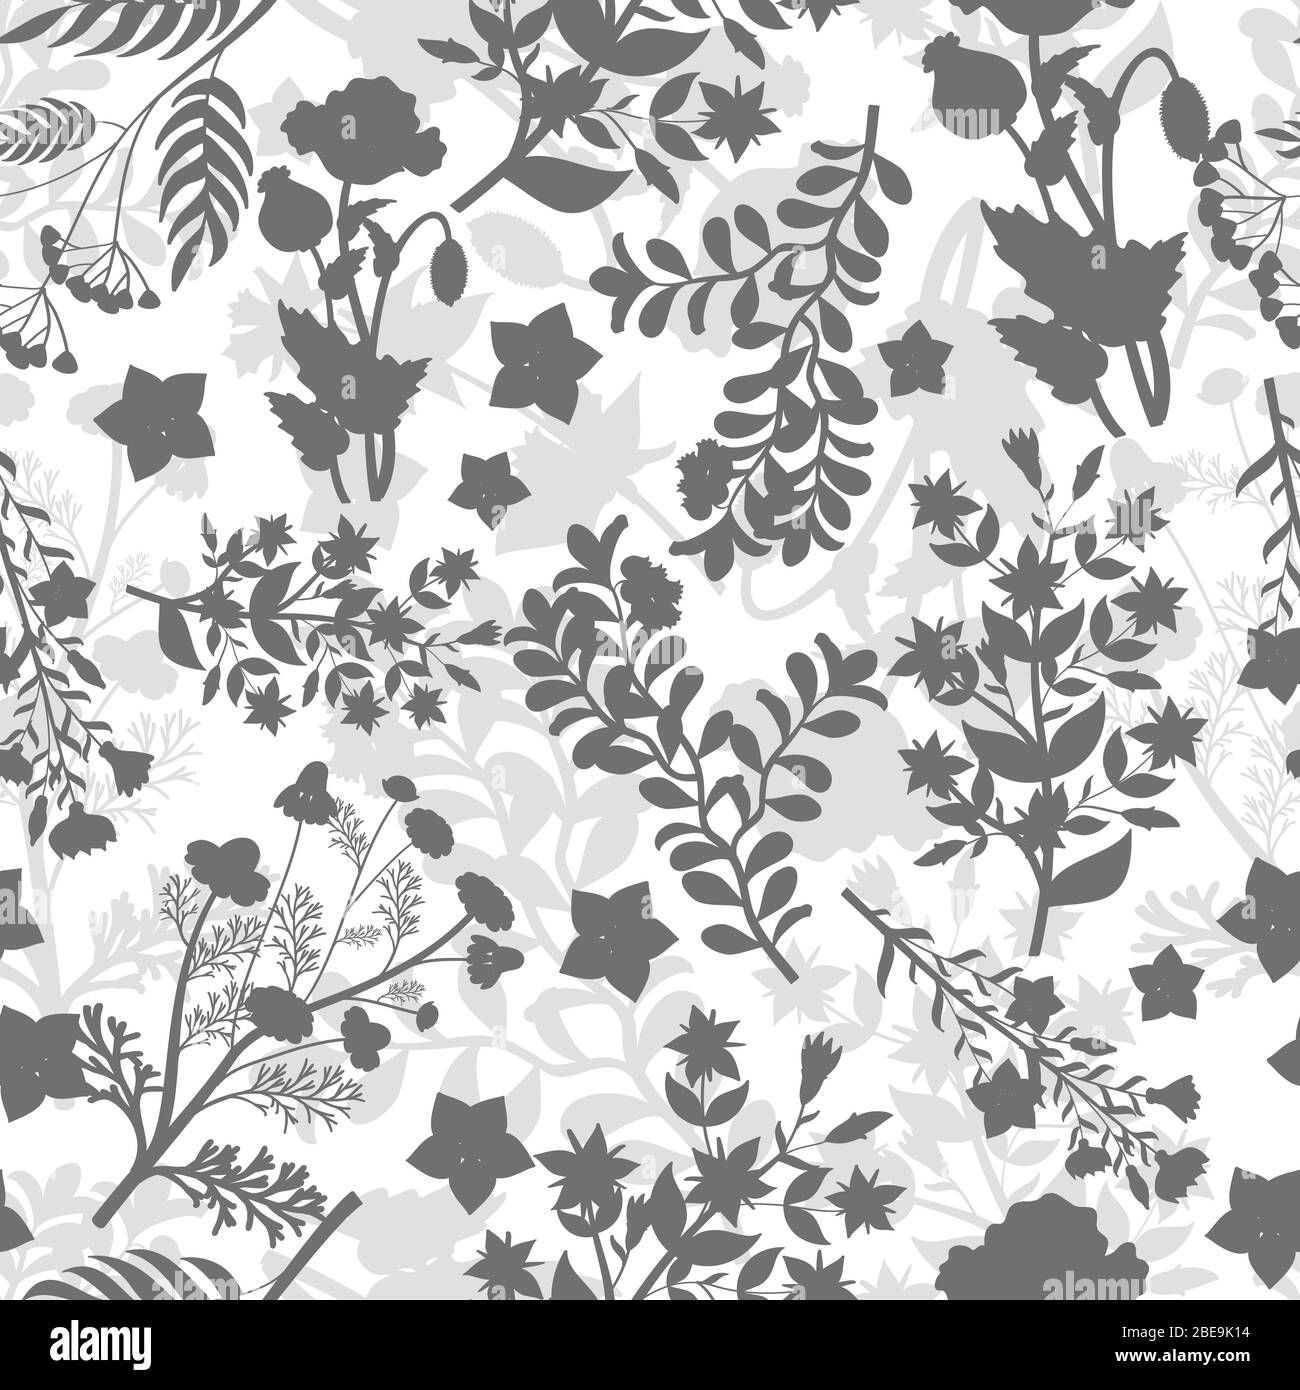 Grey floral seamless pattern design. Background with plants, vector illustration Stock Vector